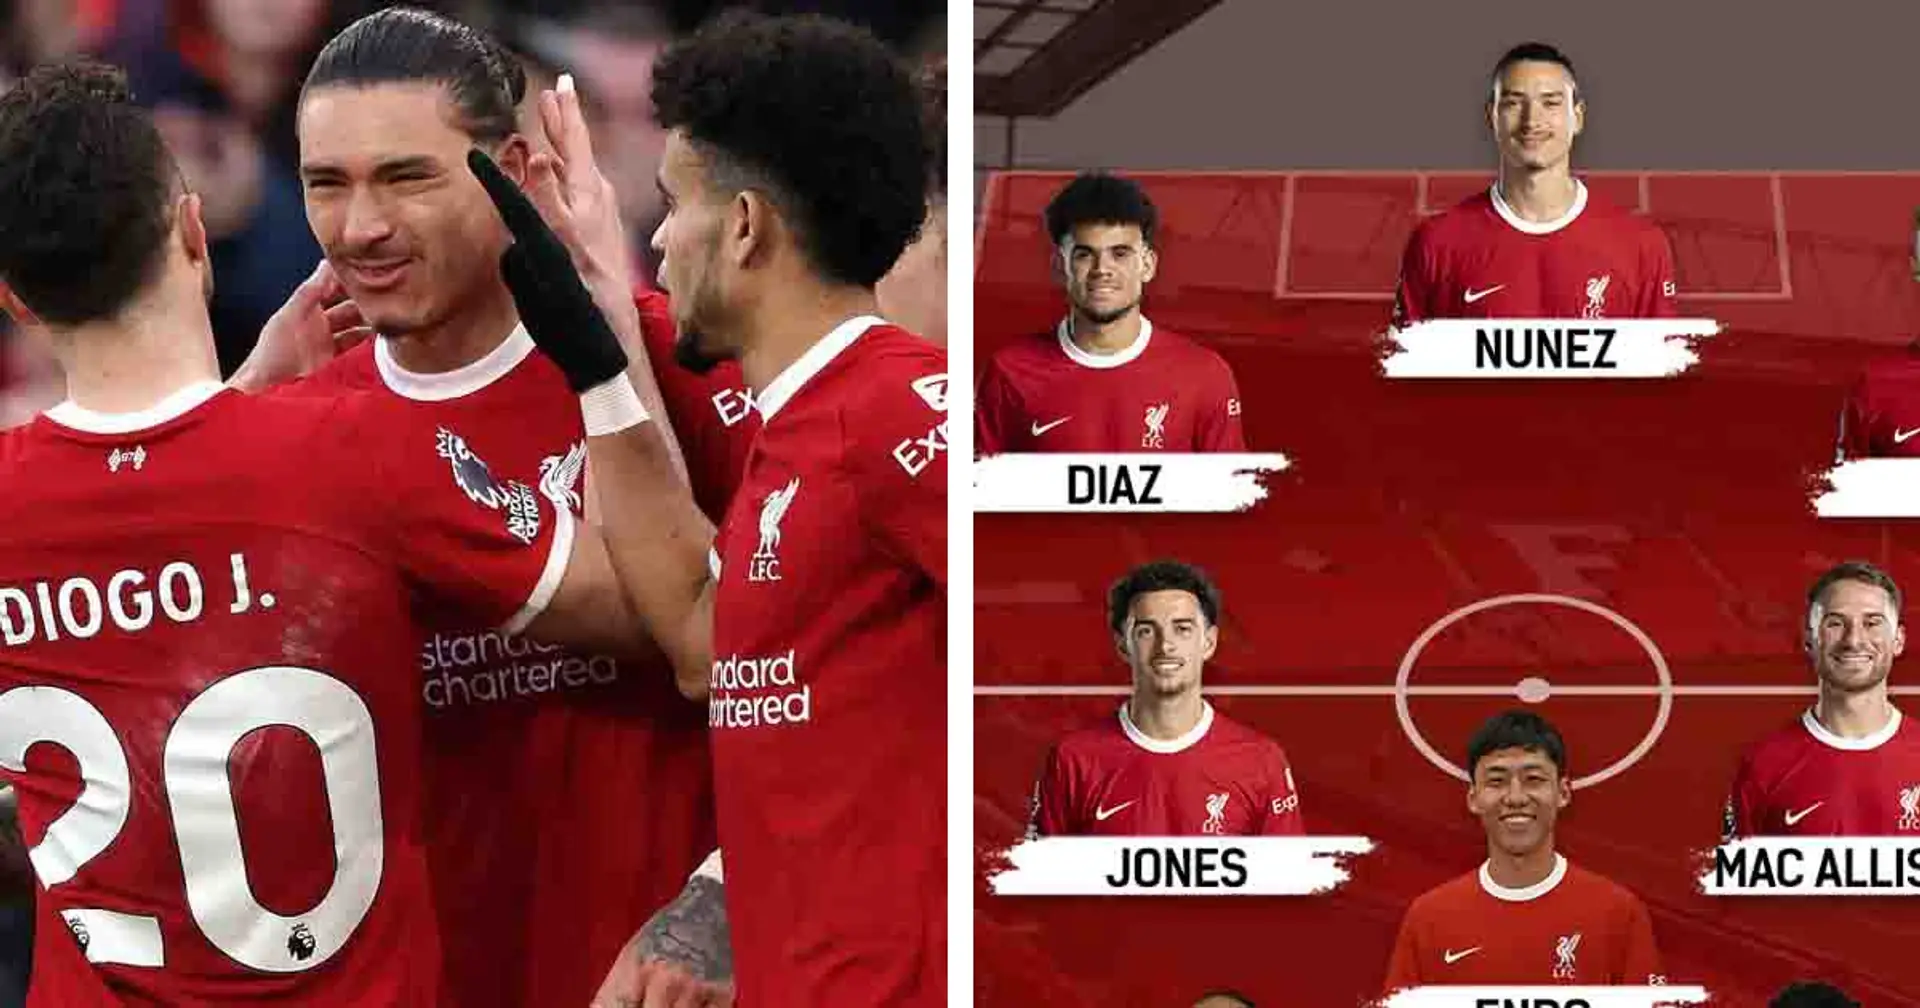 Liverpool's biggest strengths in hard-fought Burnley win shown in lineup – 4 players feature